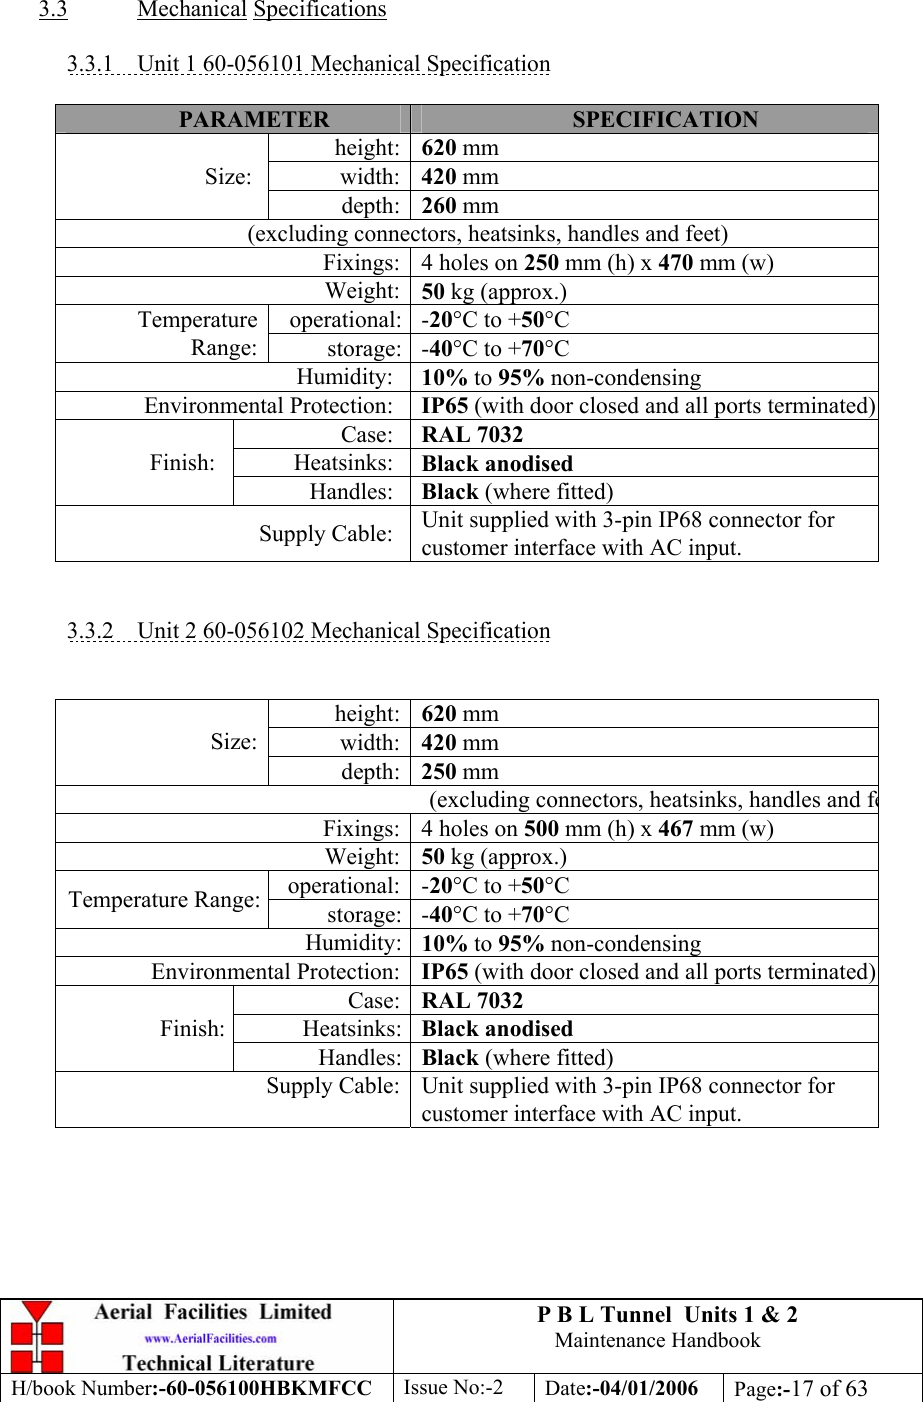 P B L Tunnel  Units 1 &amp; 2 Maintenance Handbook H/book Number:-60-056100HBKMFCC  Issue No:-2  Date:-04/01/2006  Page:-17 of 63   3.3 Mechanical Specifications  3.3.1  Unit 1 60-056101 Mechanical Specification  PARAMETER  SPECIFICATION height: 620 mm width: 420 mm Size: depth: 260 mm (excluding connectors, heatsinks, handles and feet) Fixings: 4 holes on 250 mm (h) x 470 mm (w) Weight: 50 kg (approx.) operational: -20°C to +50°C Temperature Range:  storage: -40°C to +70°C Humidity:  10% to 95% non-condensing Environmental Protection:  IP65 (with door closed and all ports terminated)Case:  RAL 7032 Heatsinks:  Black anodised Finish: Handles:  Black (where fitted) Supply Cable:  Unit supplied with 3-pin IP68 connector for customer interface with AC input.   3.3.2  Unit 2 60-056102 Mechanical Specification   height: 620 mm width: 420 mm Size: depth: 250 mm (excluding connectors, heatsinks, handles and feFixings: 4 holes on 500 mm (h) x 467 mm (w) Weight: 50 kg (approx.) operational: -20°C to +50°C Temperature Range:  storage: -40°C to +70°C Humidity: 10% to 95% non-condensing Environmental Protection: IP65 (with door closed and all ports terminated)Case: RAL 7032 Heatsinks: Black anodised Finish: Handles: Black (where fitted) Supply Cable: Unit supplied with 3-pin IP68 connector for customer interface with AC input.   